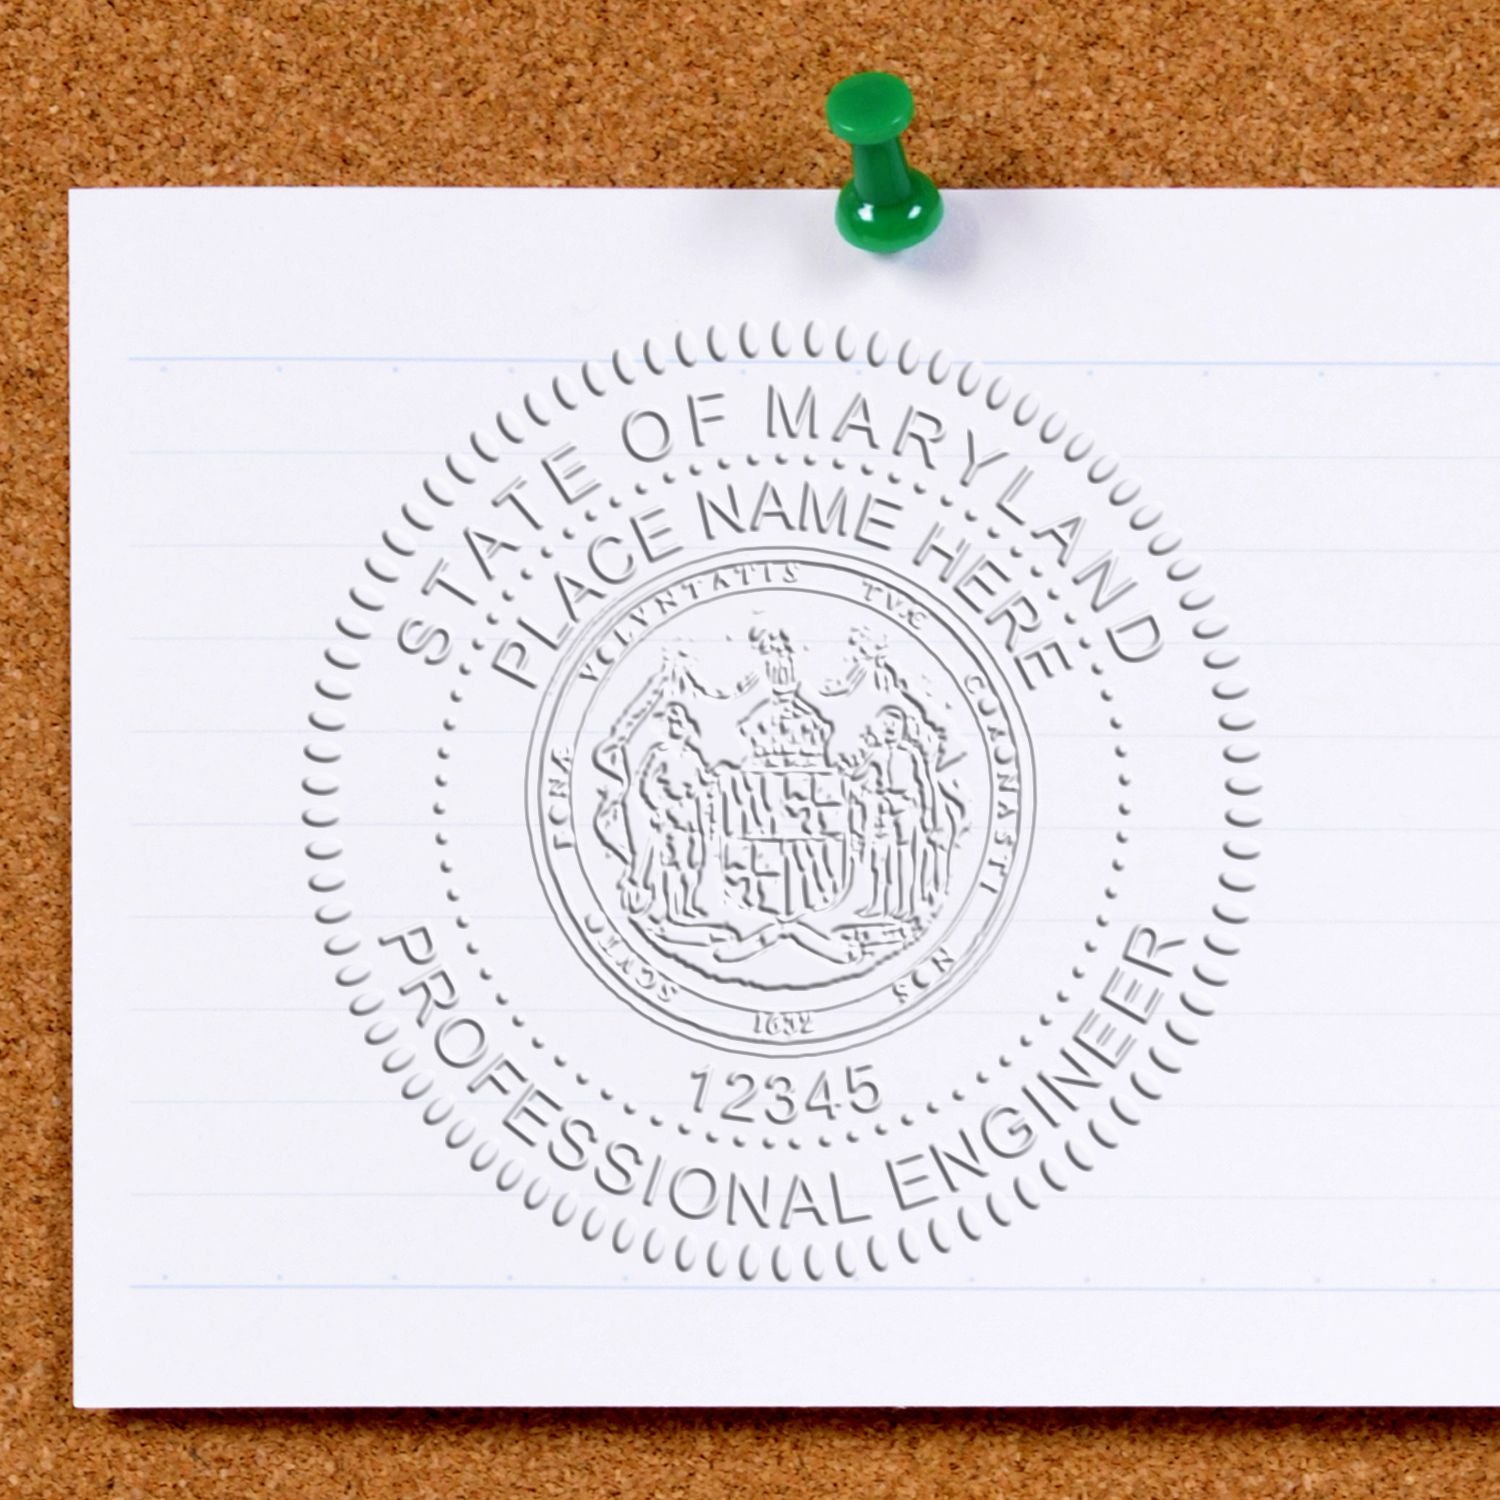 The main image for the State of Maryland Extended Long Reach Engineer Seal depicting a sample of the imprint and electronic files